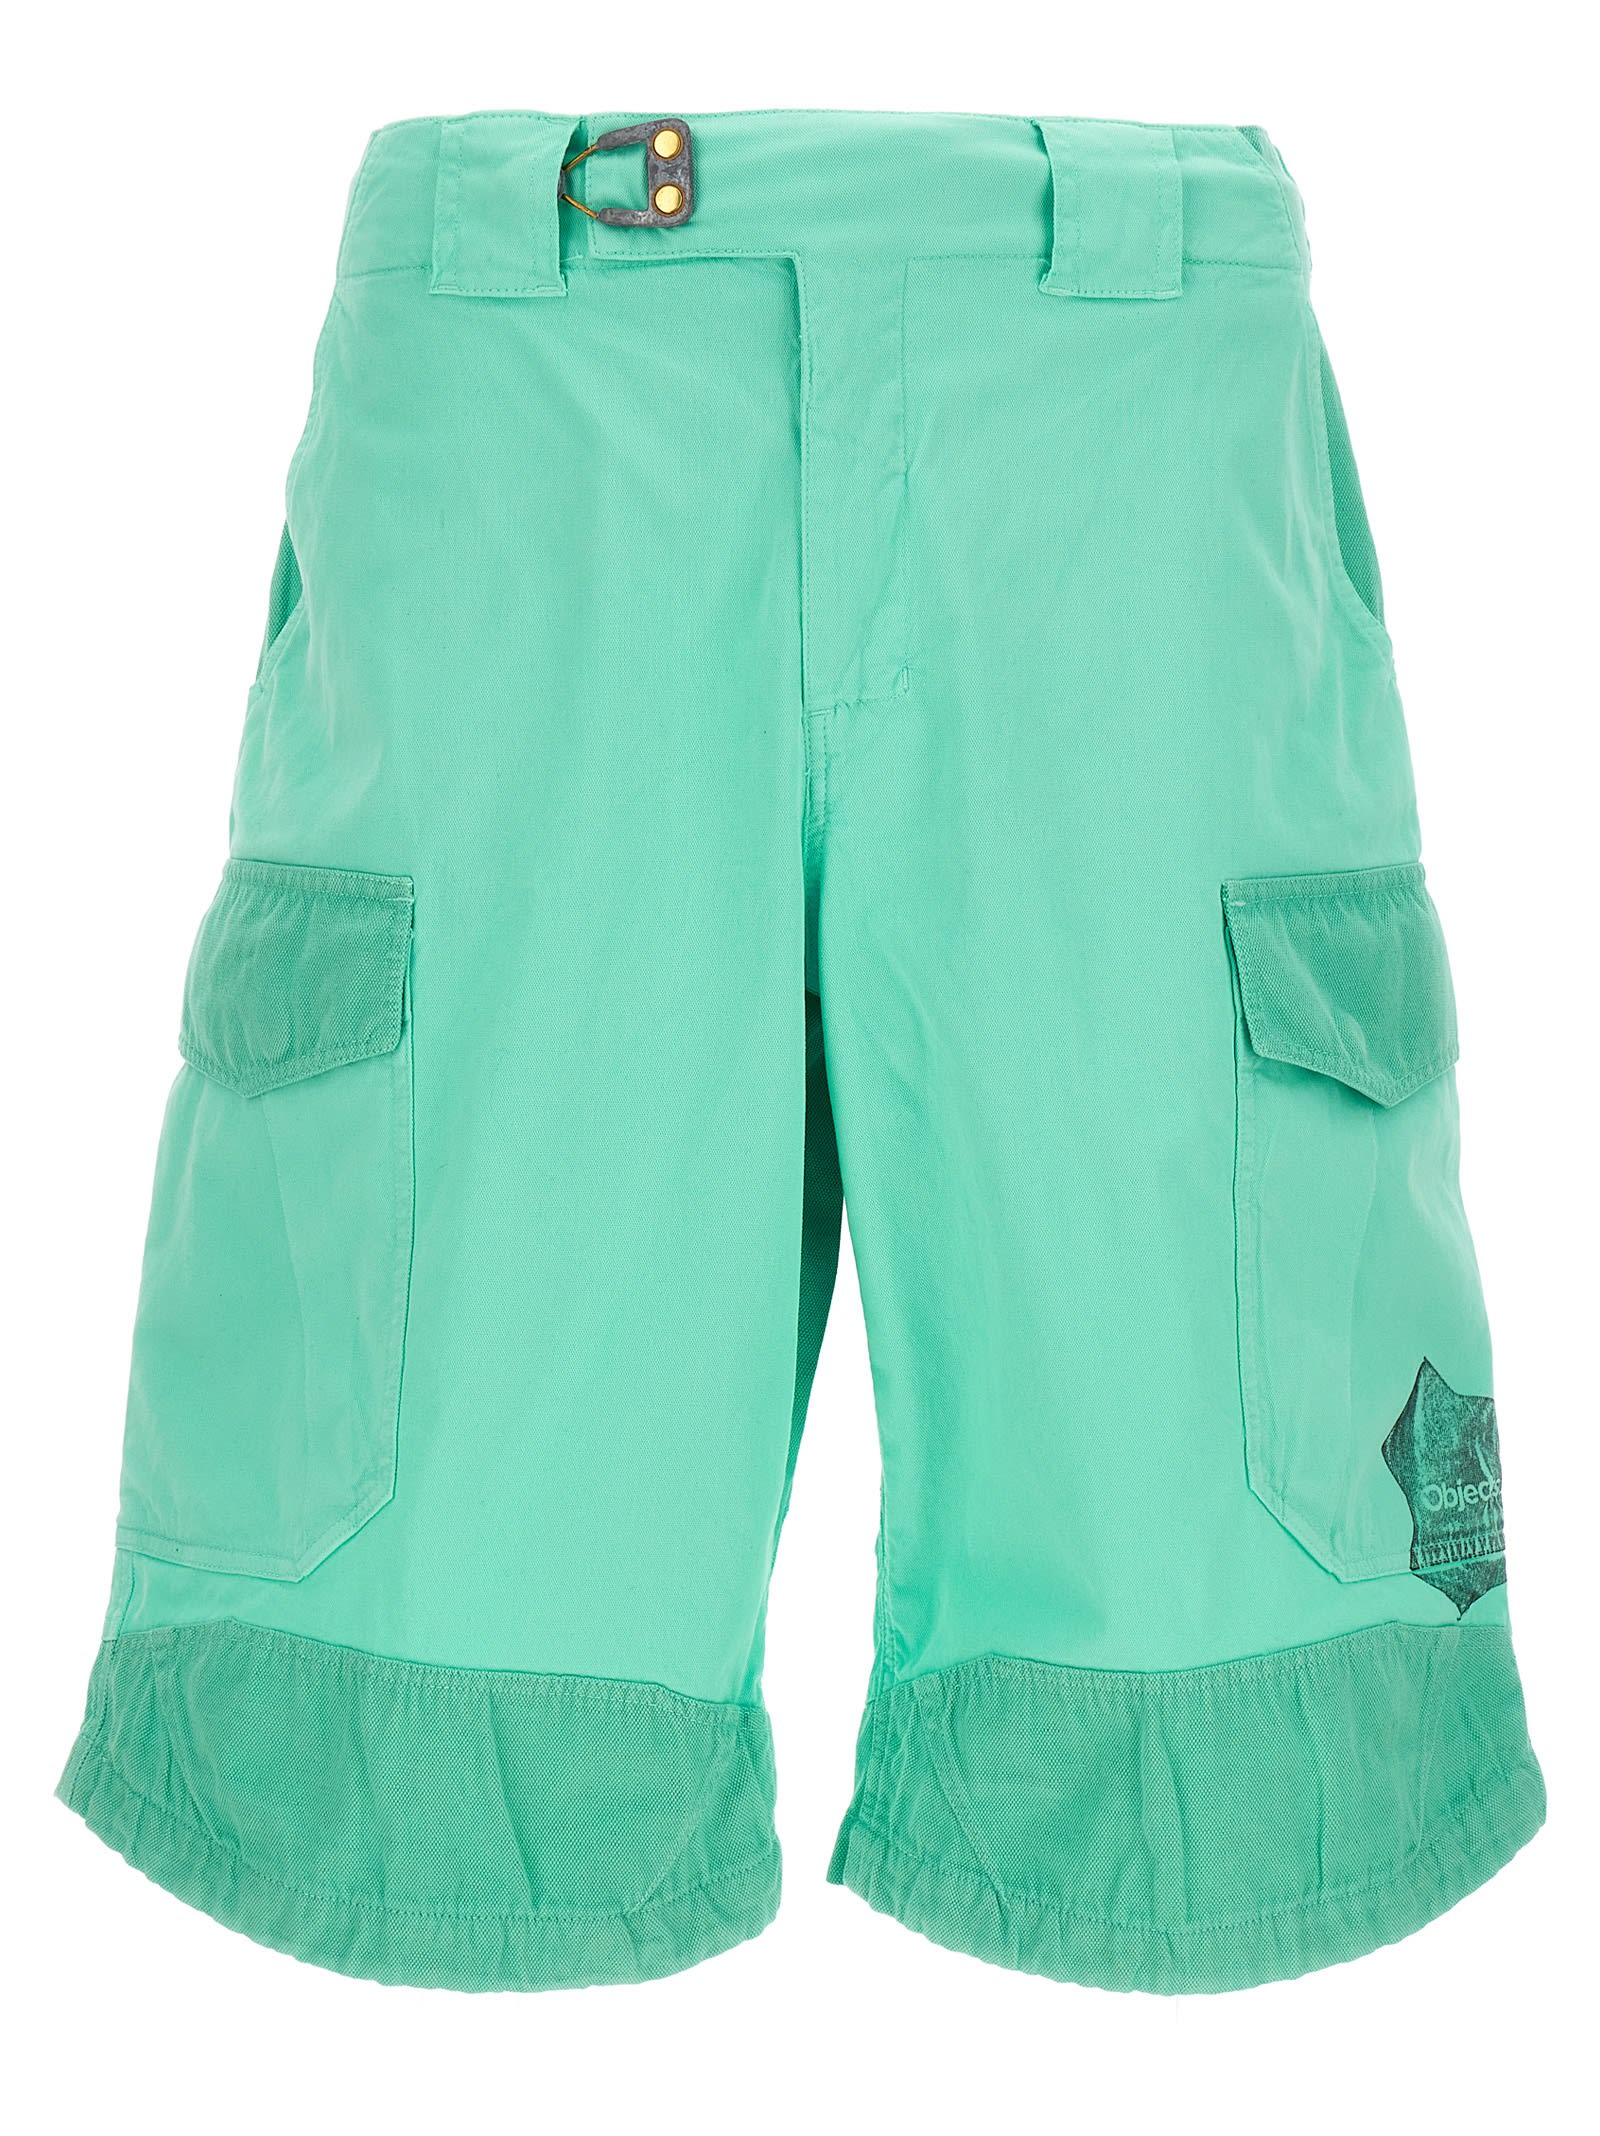 Shop Objects Iv Life Cargo Shorts In Green